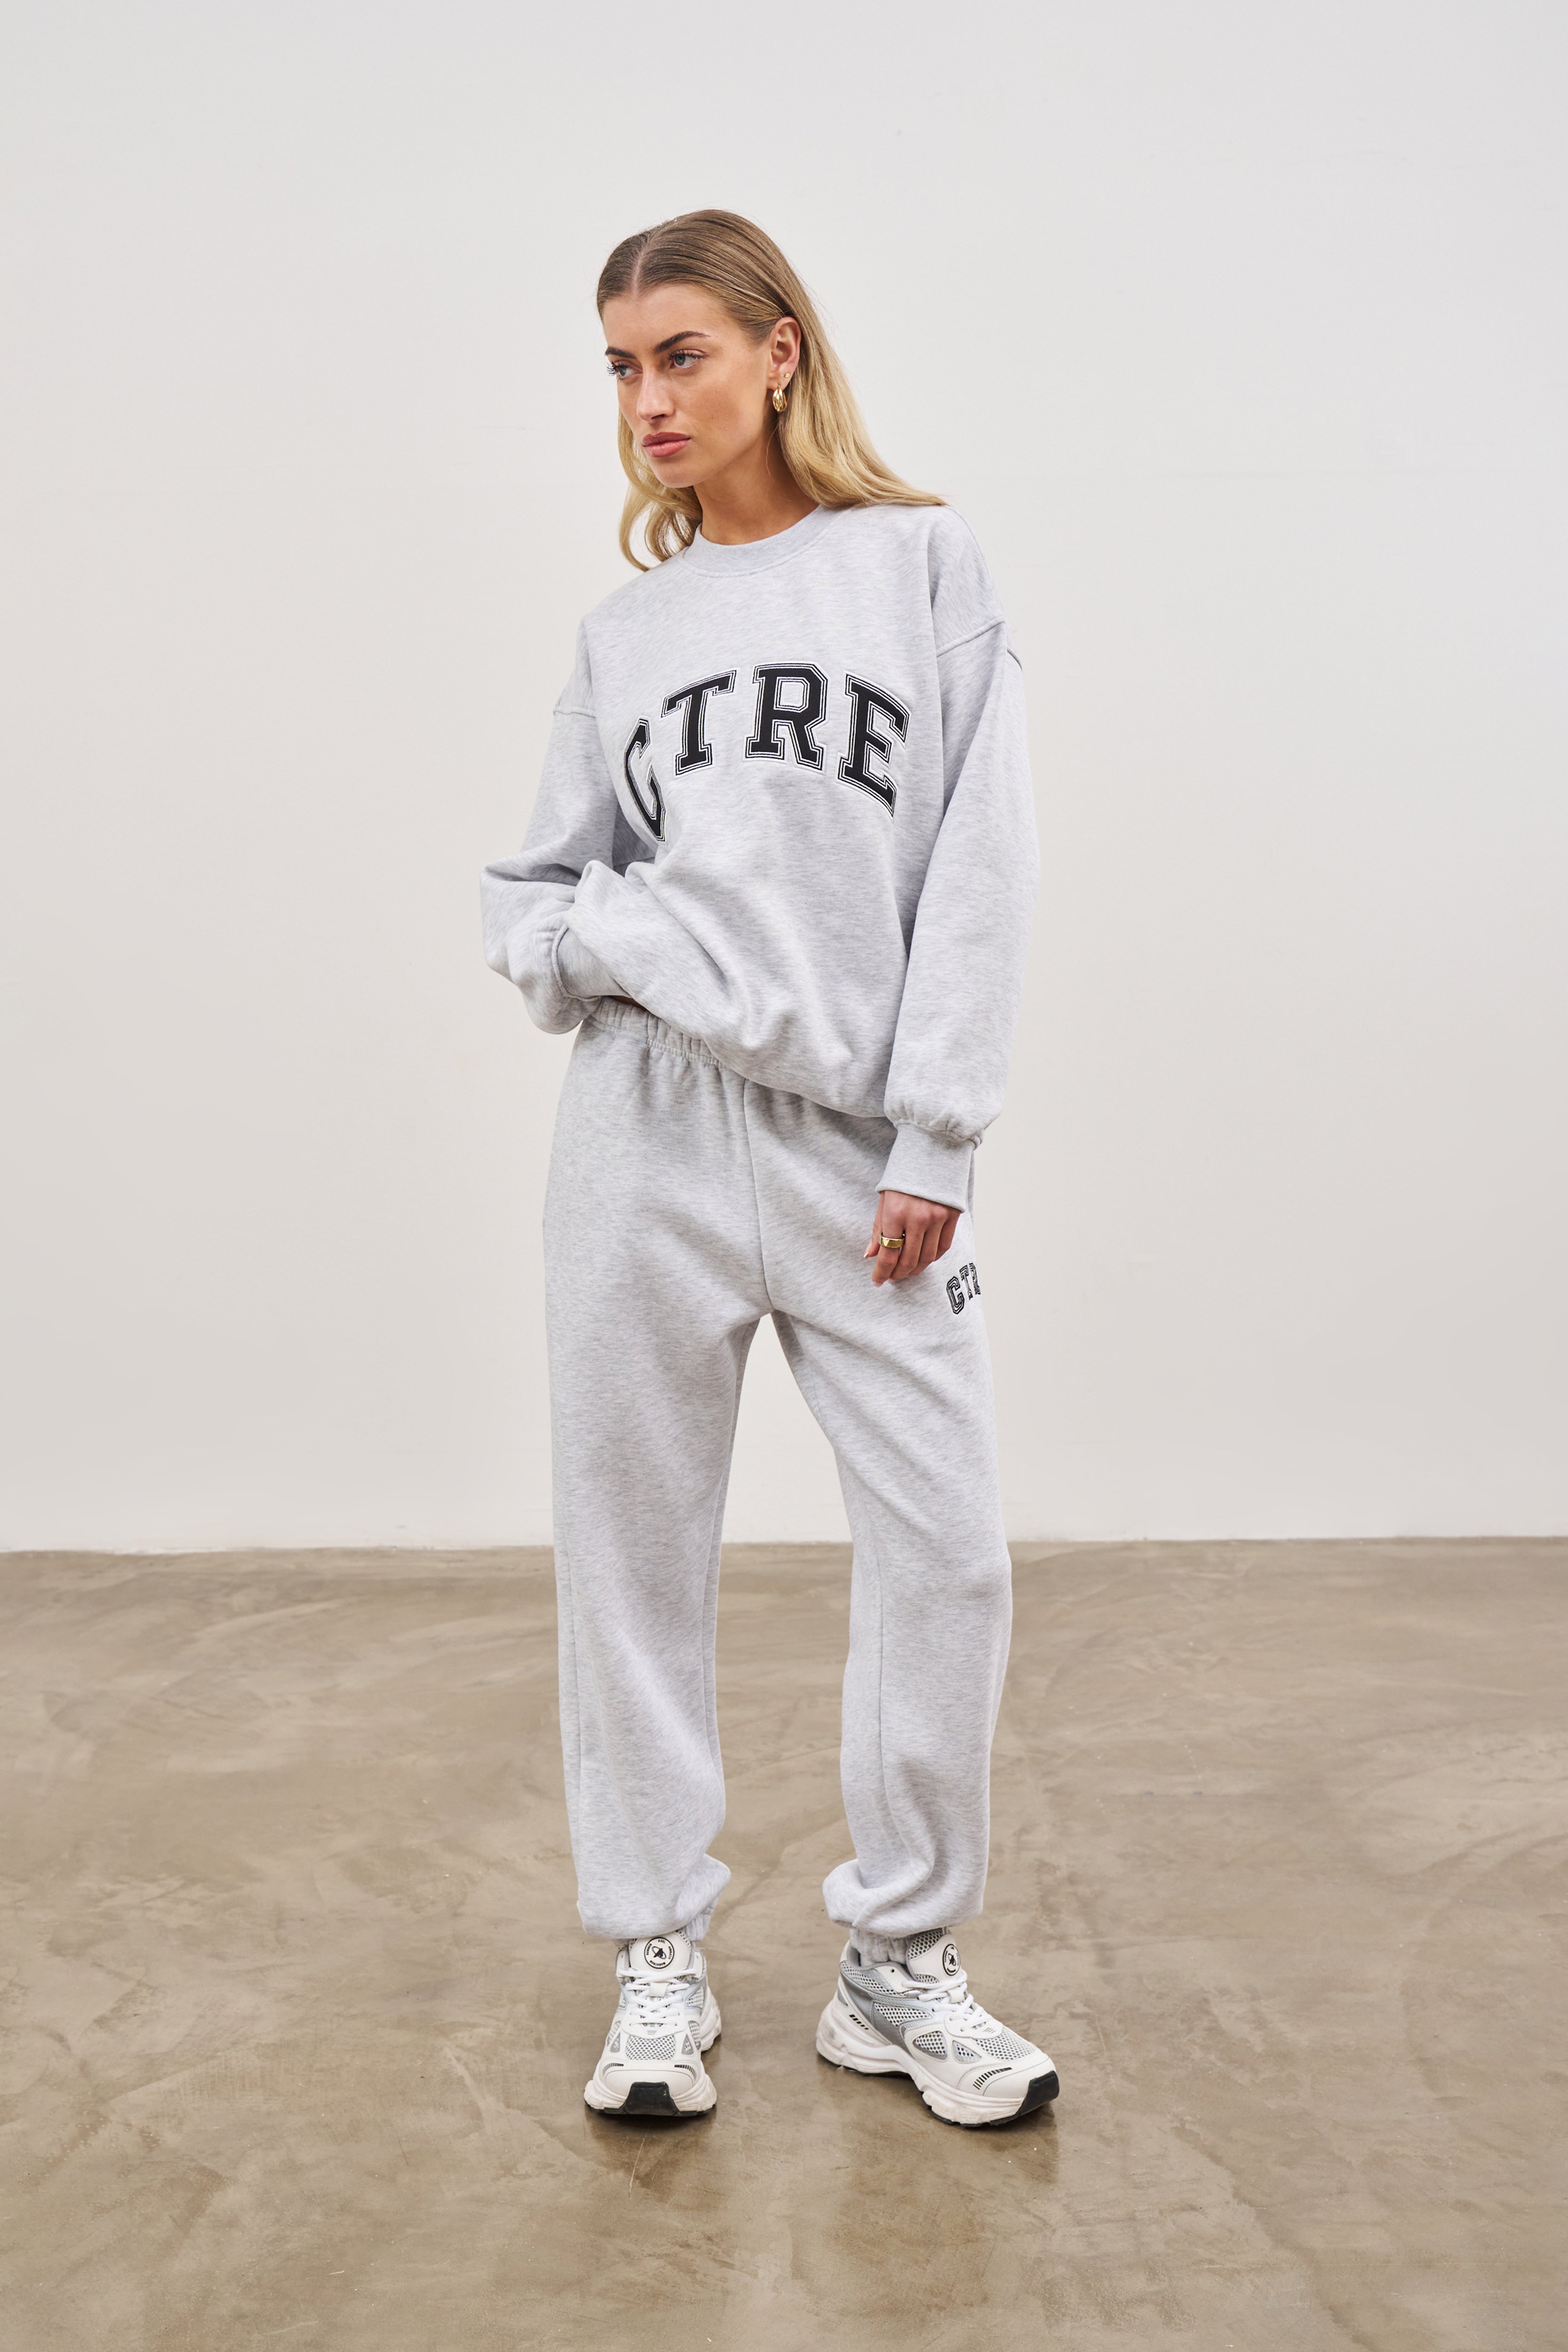 CTRE SWEATSHIRT - GREY MARL – The Couture Club